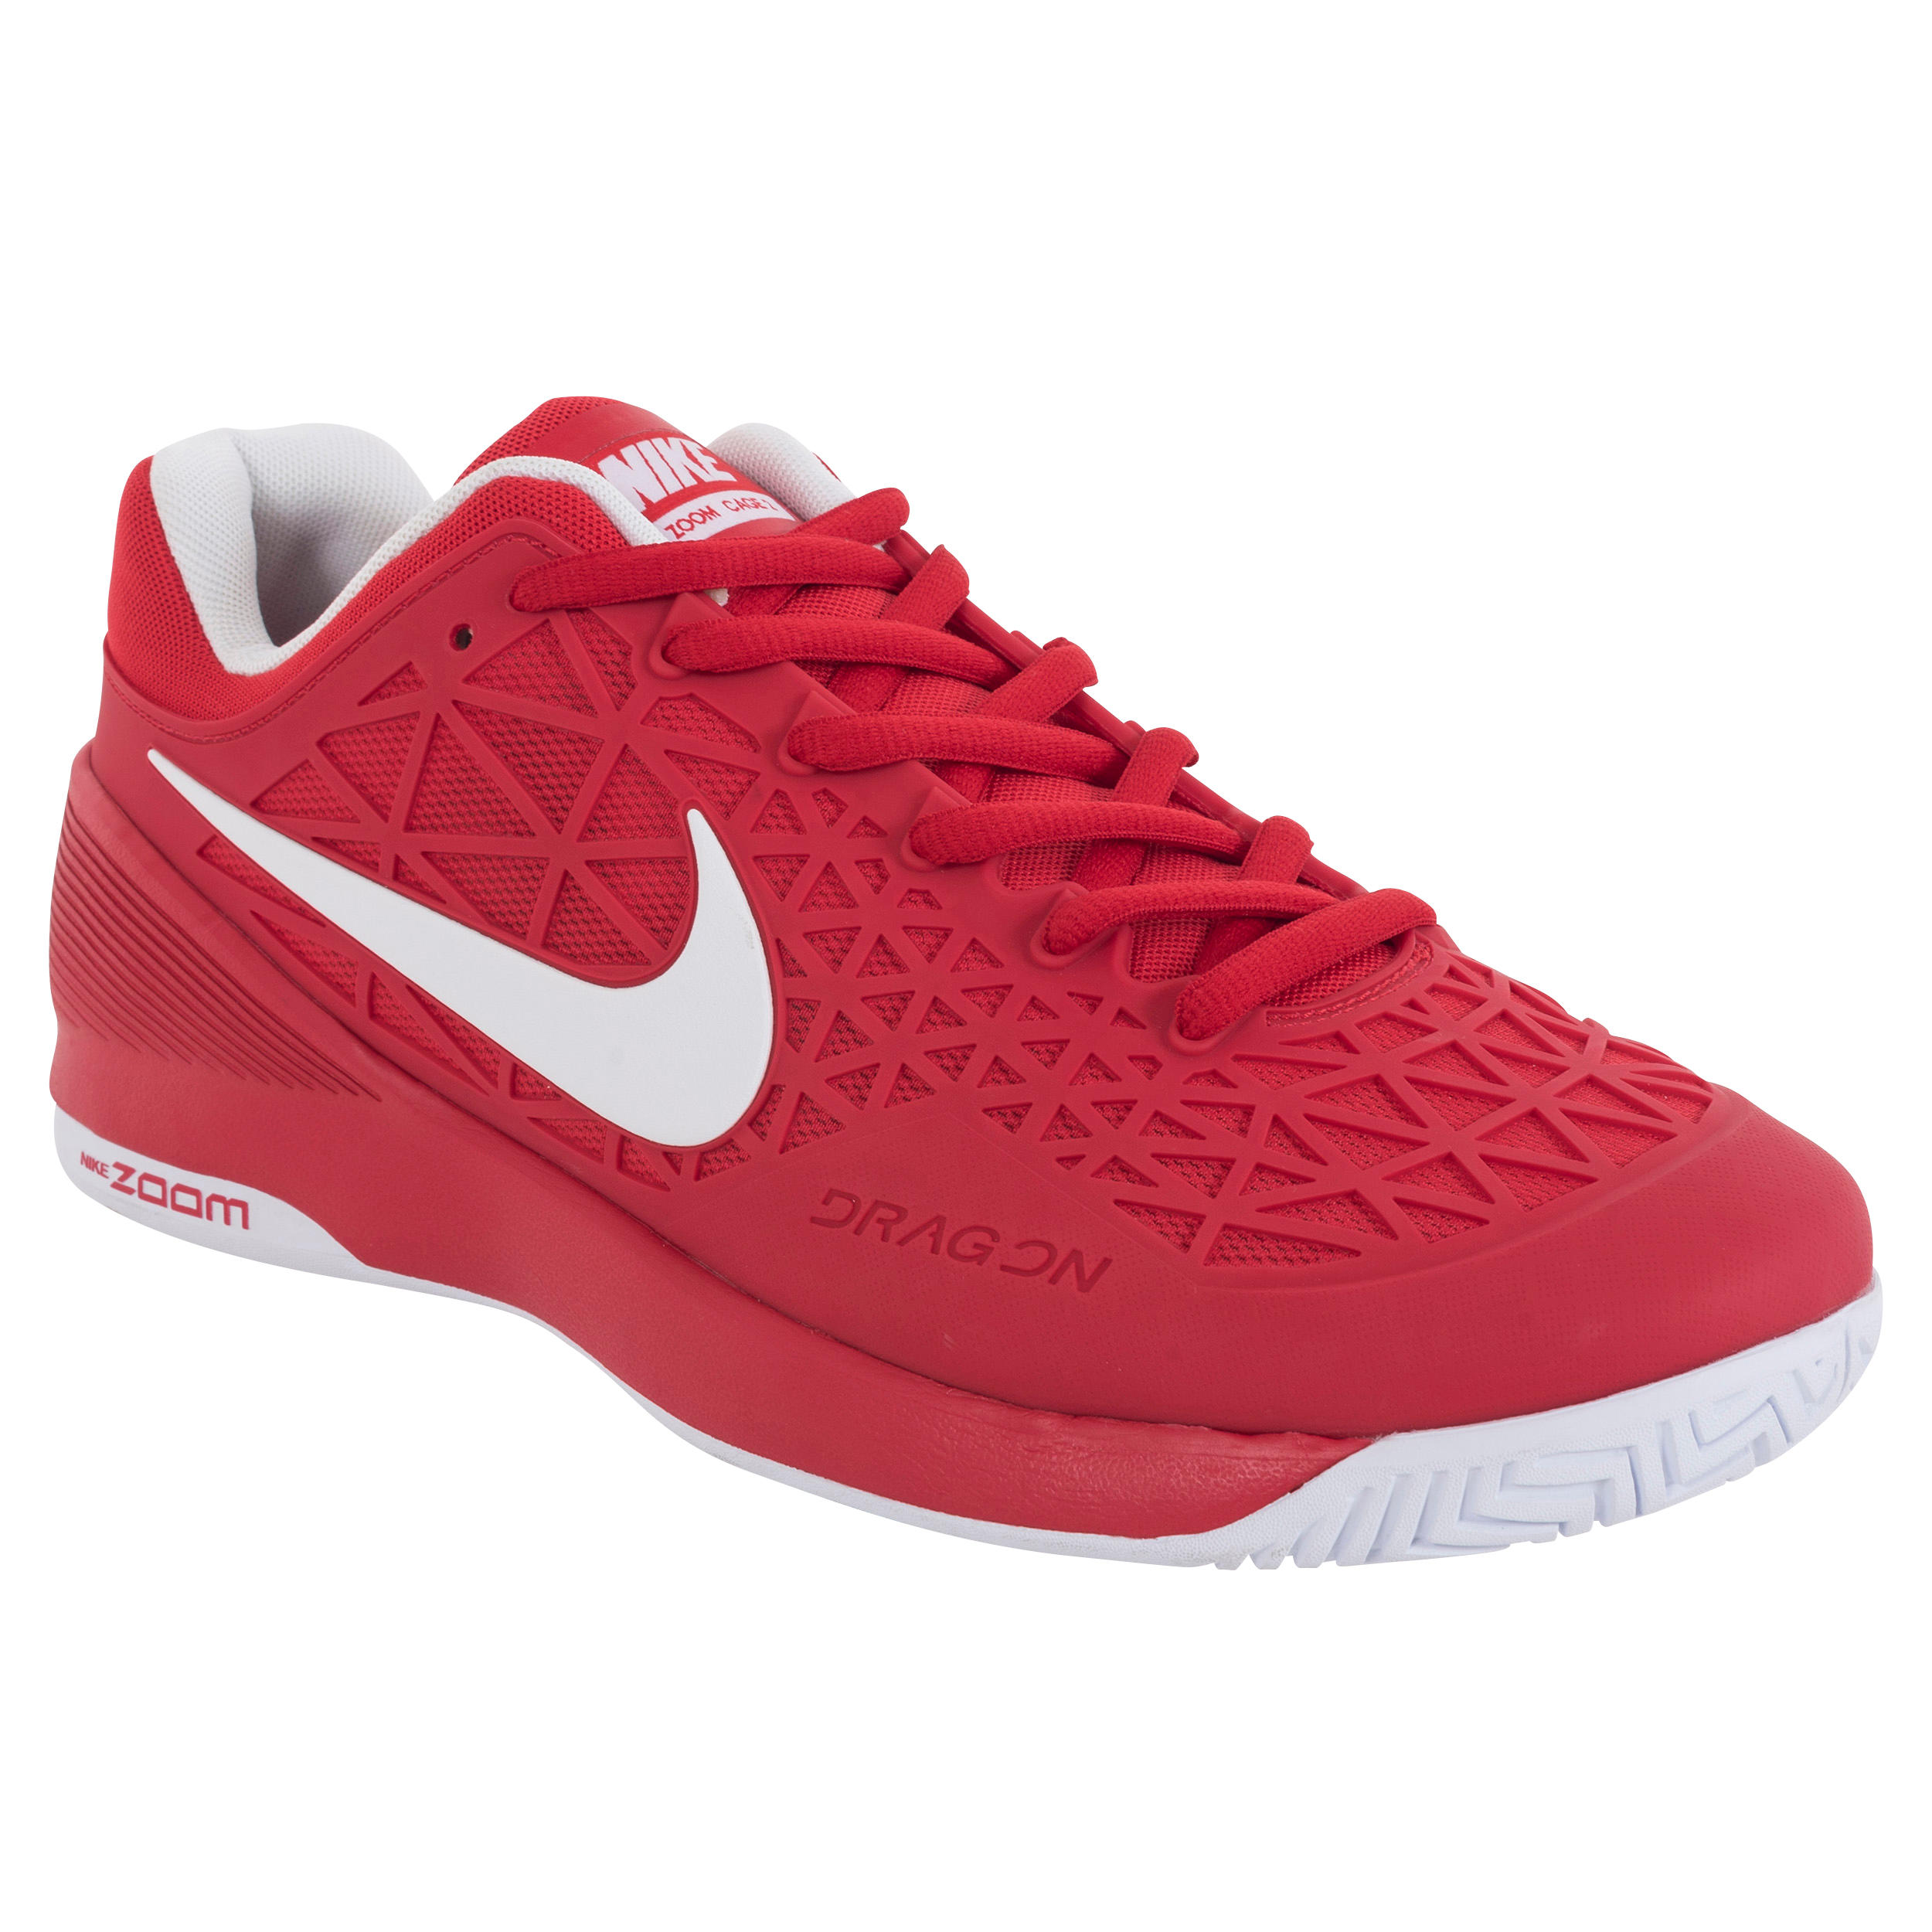 NIKE Zoom Cage 2 Tennis Shoes - Red / White